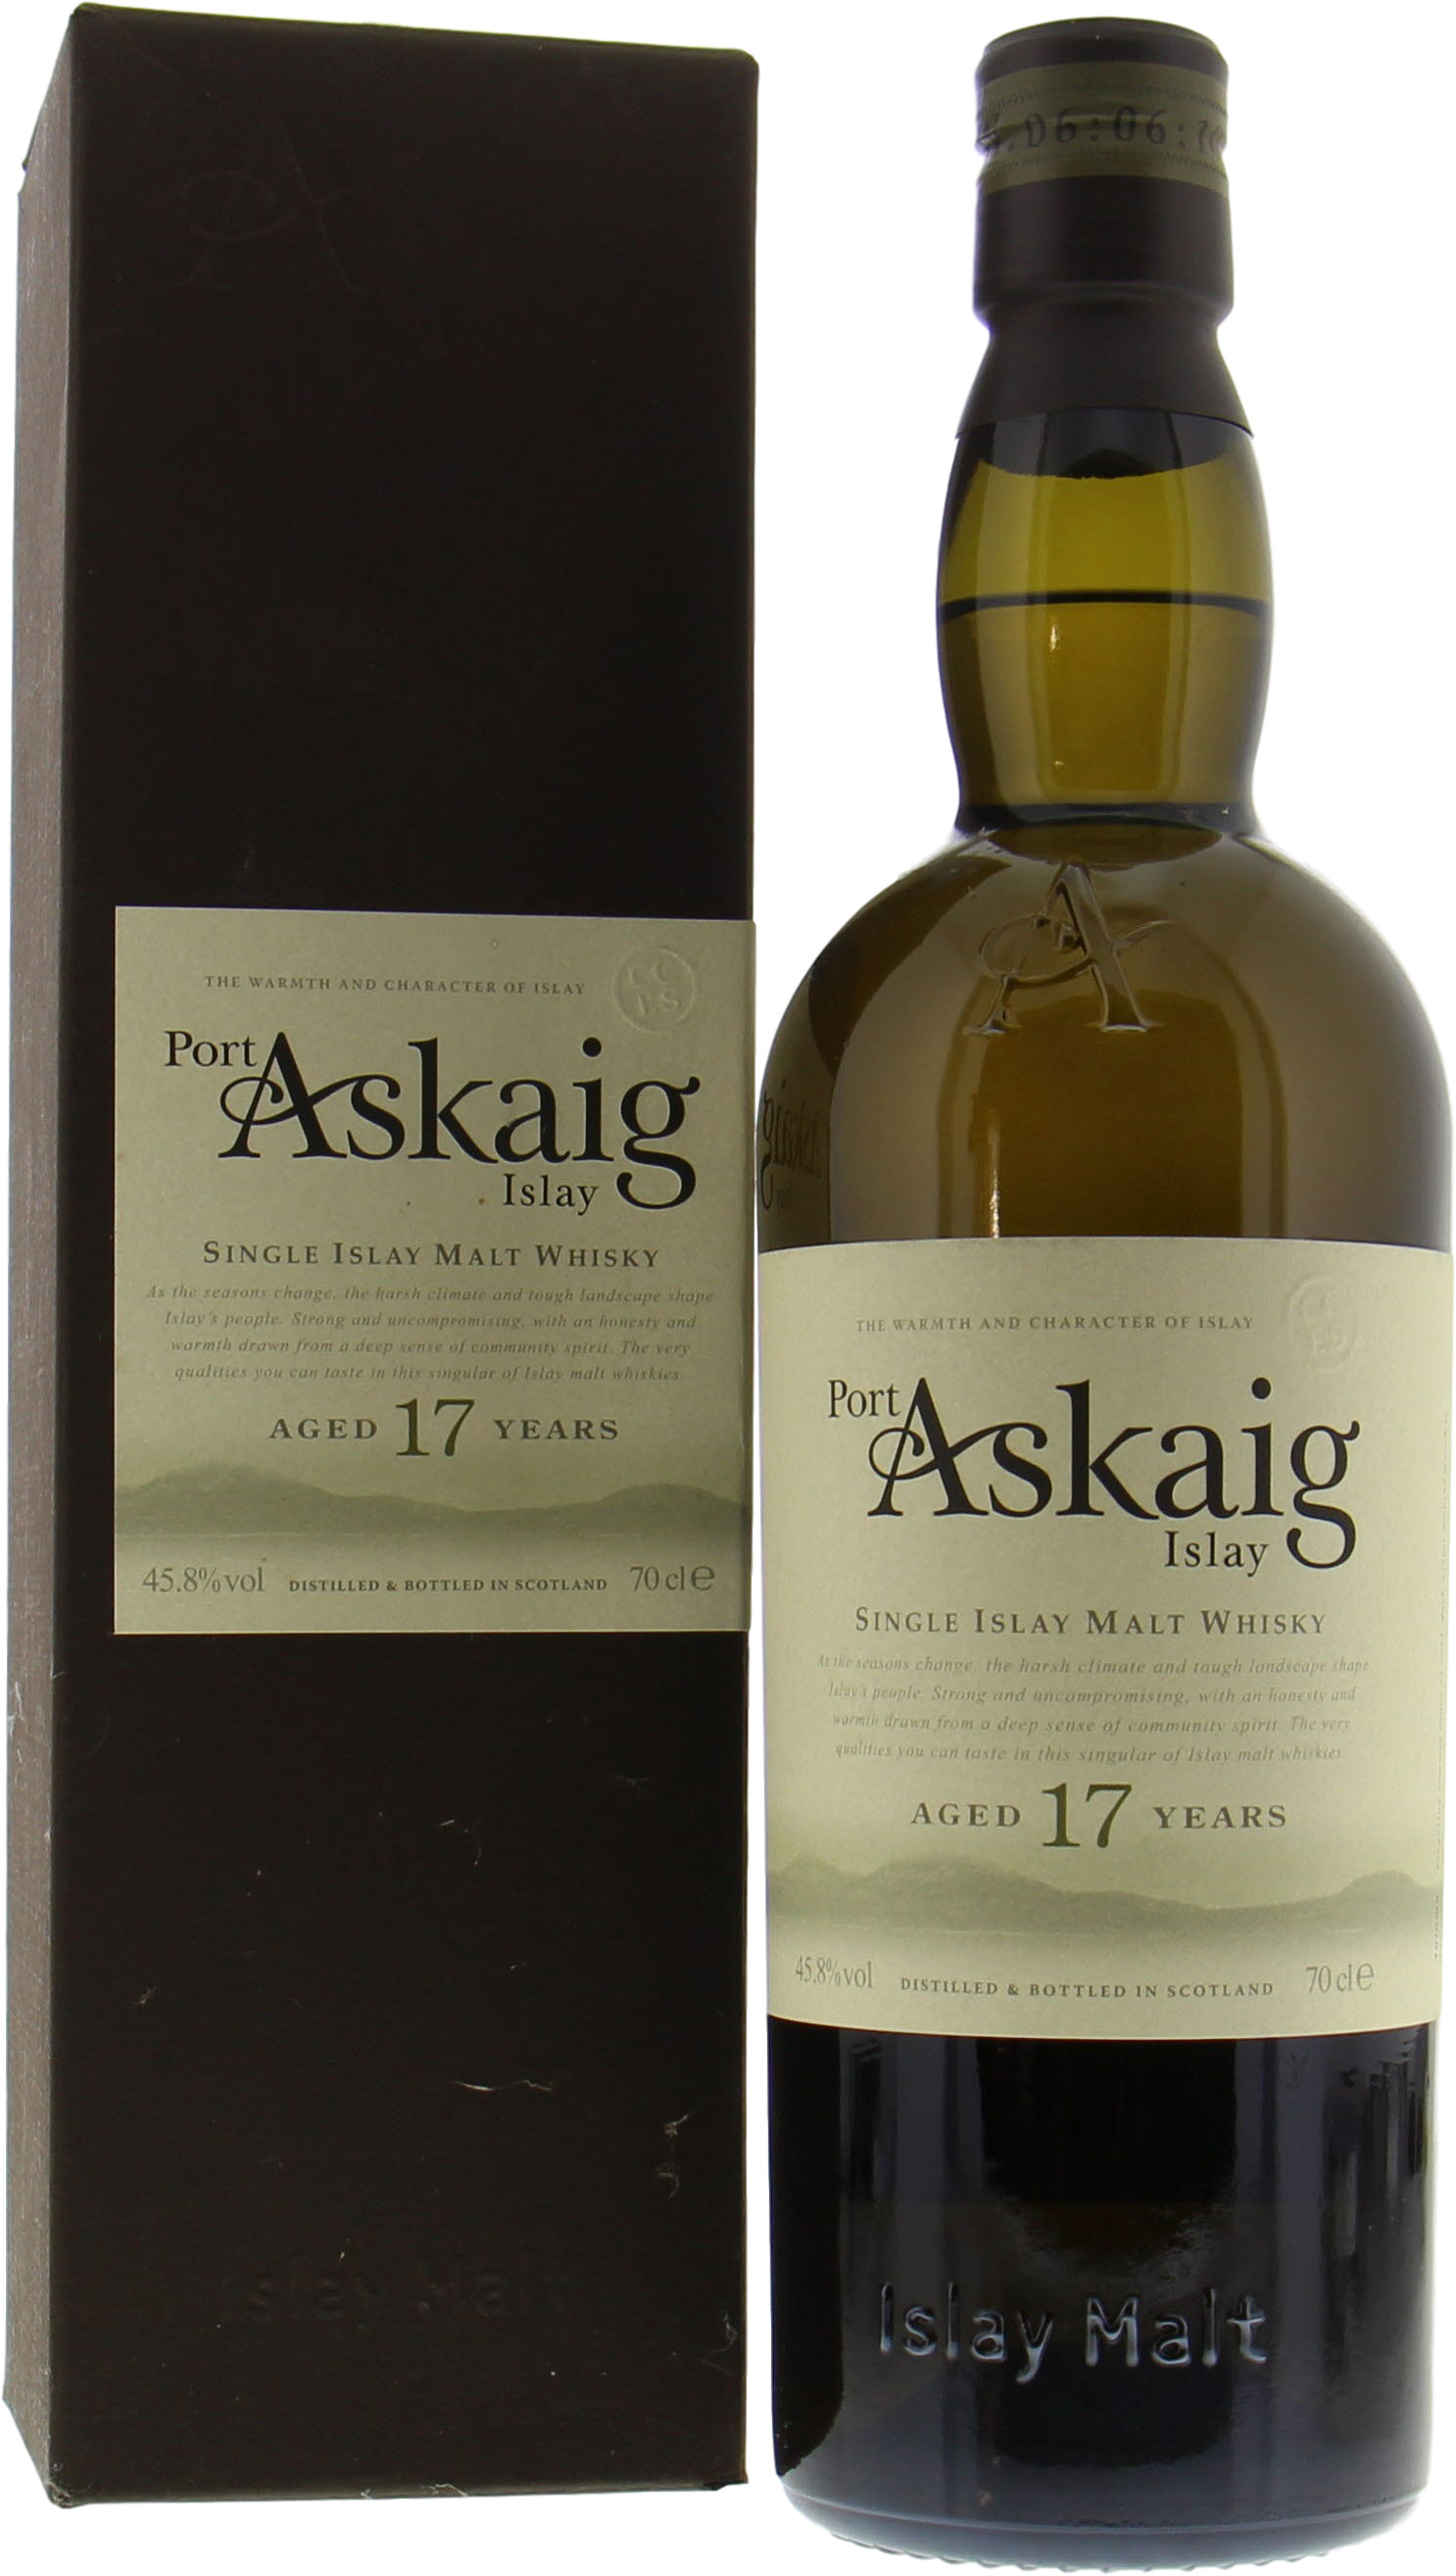 Port Askaig - 17 Years Old 45.8% NV In Original Container